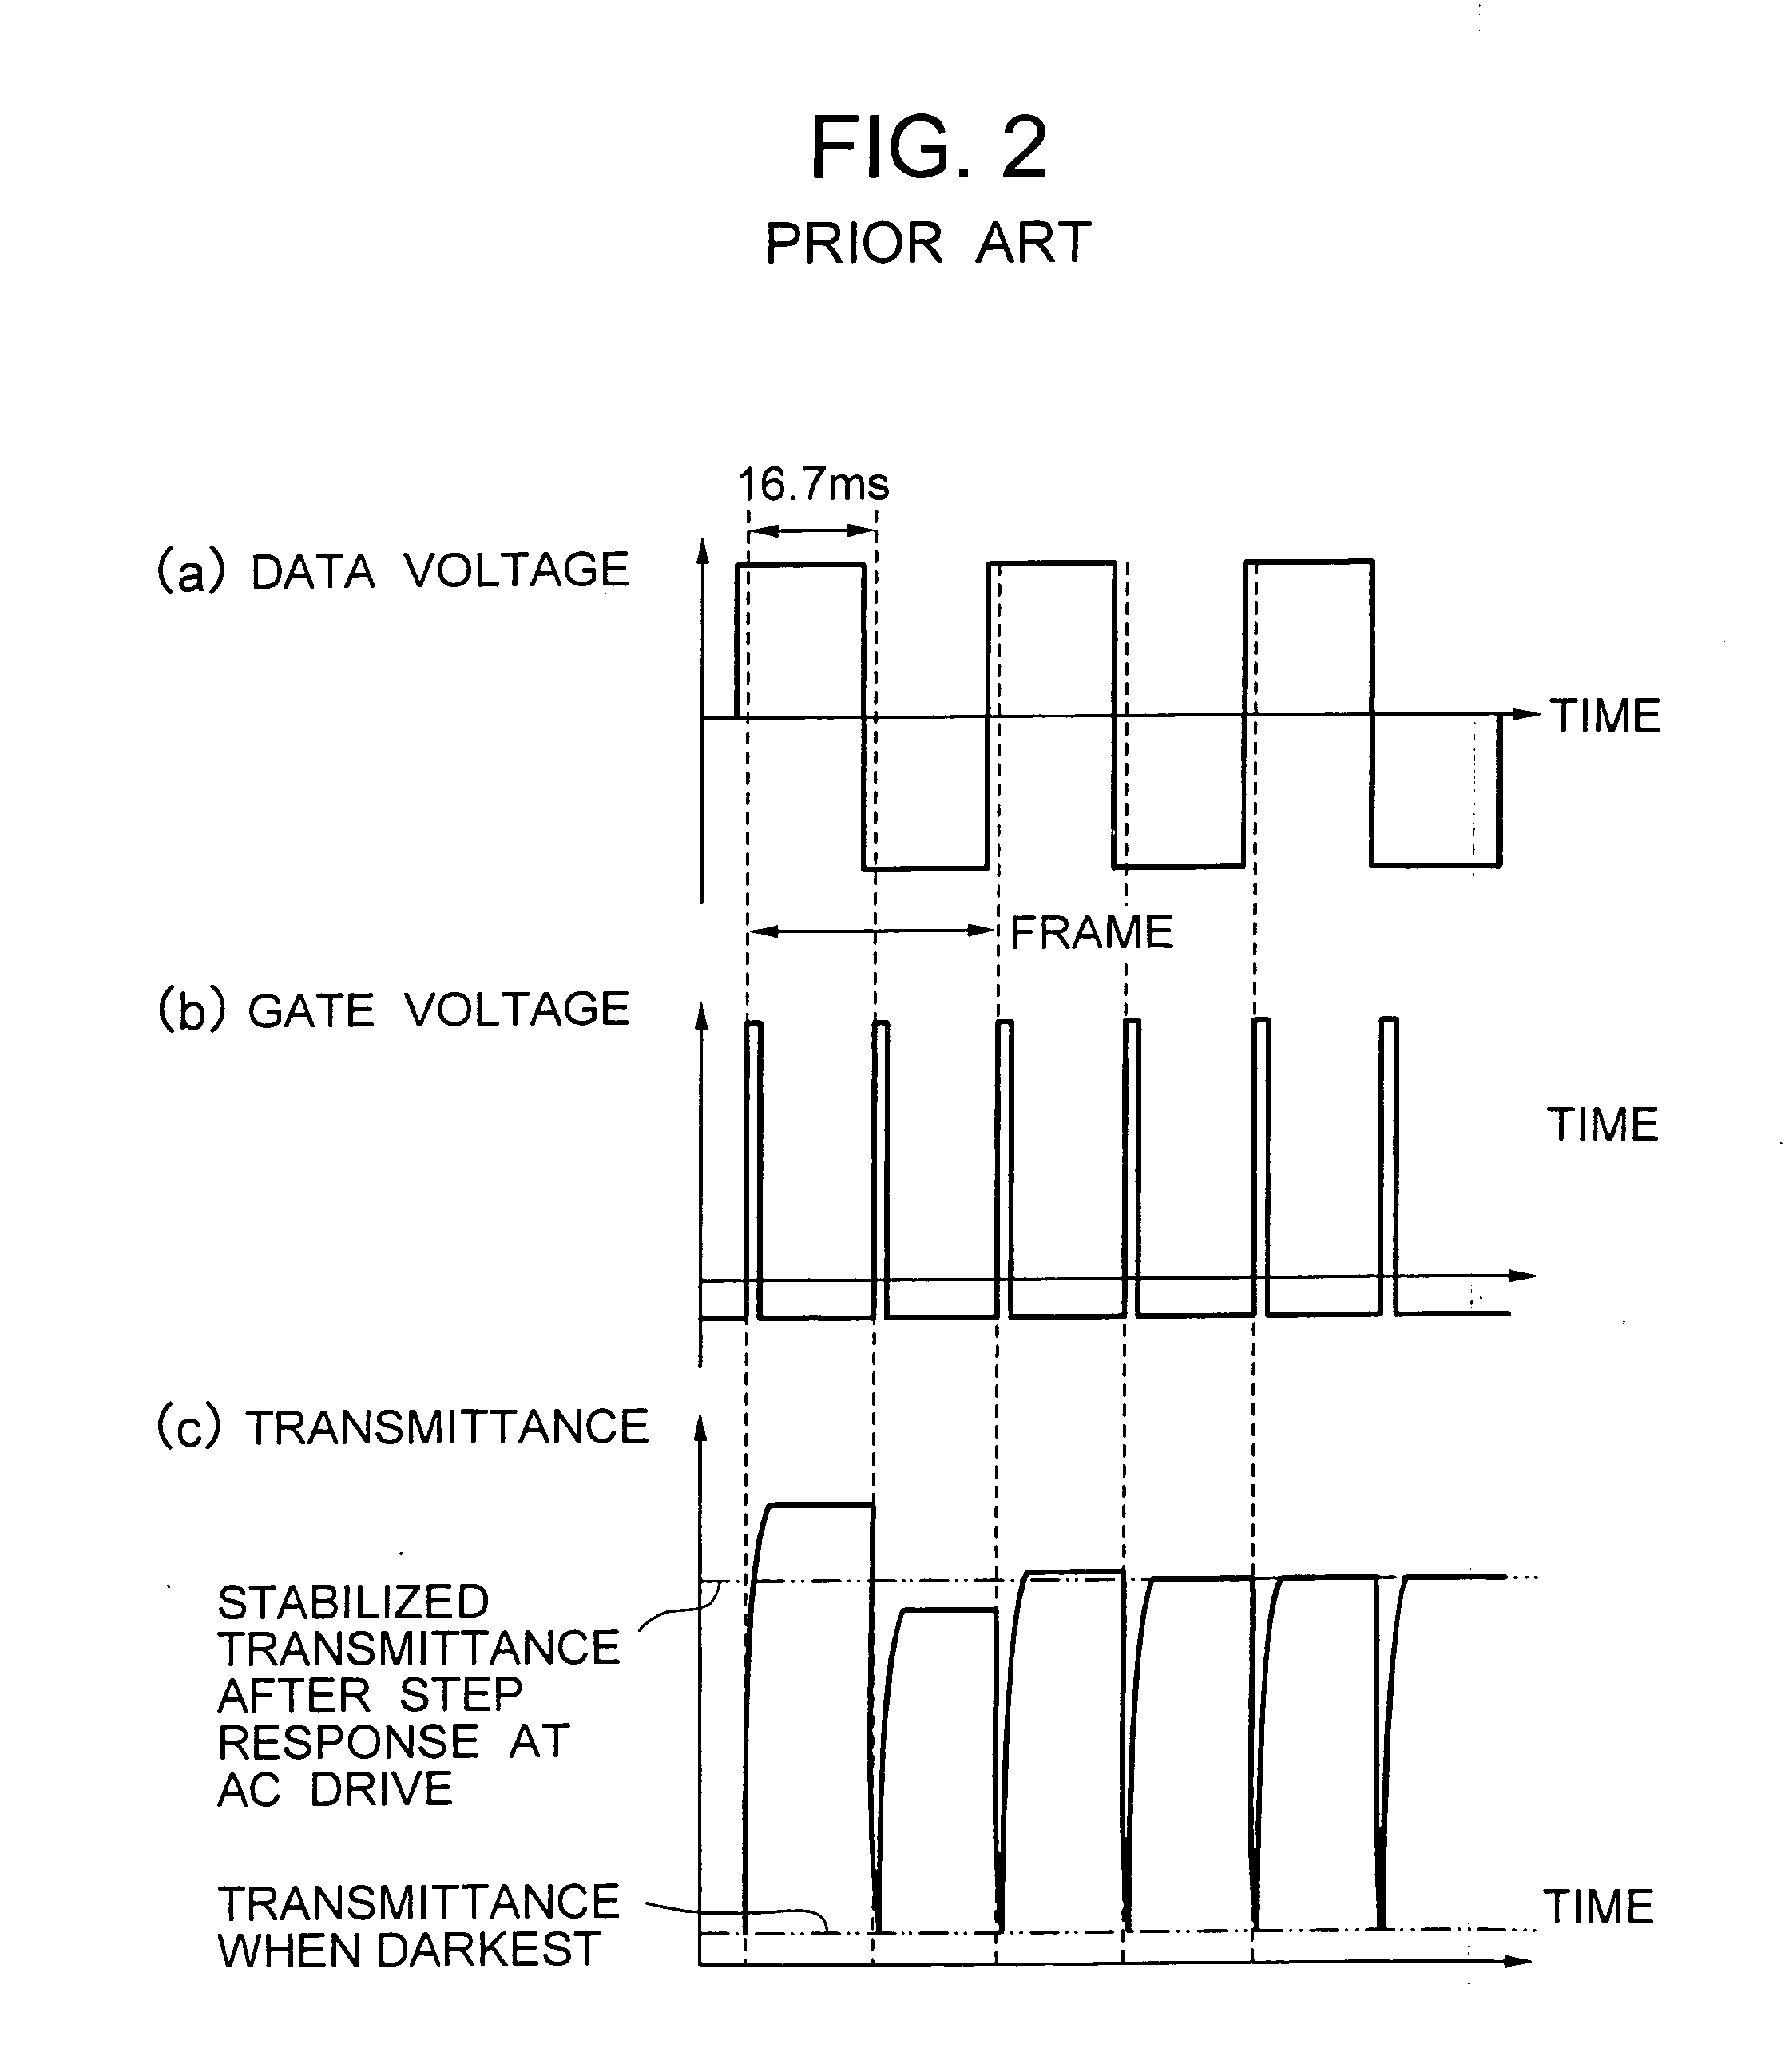 Liquid crystal display apparatus and method of driving the same